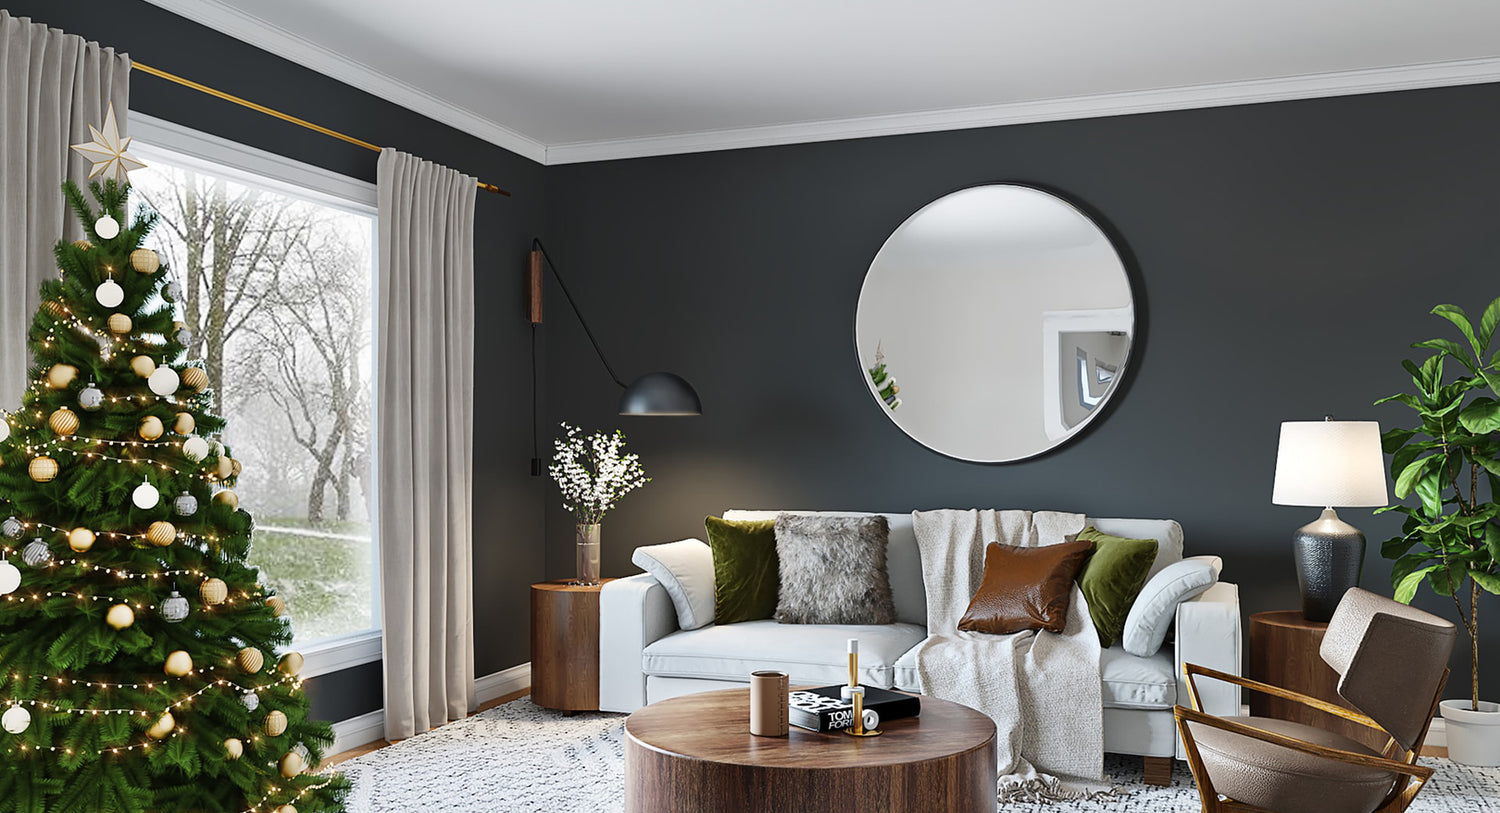 The 5 best mirrors for your home